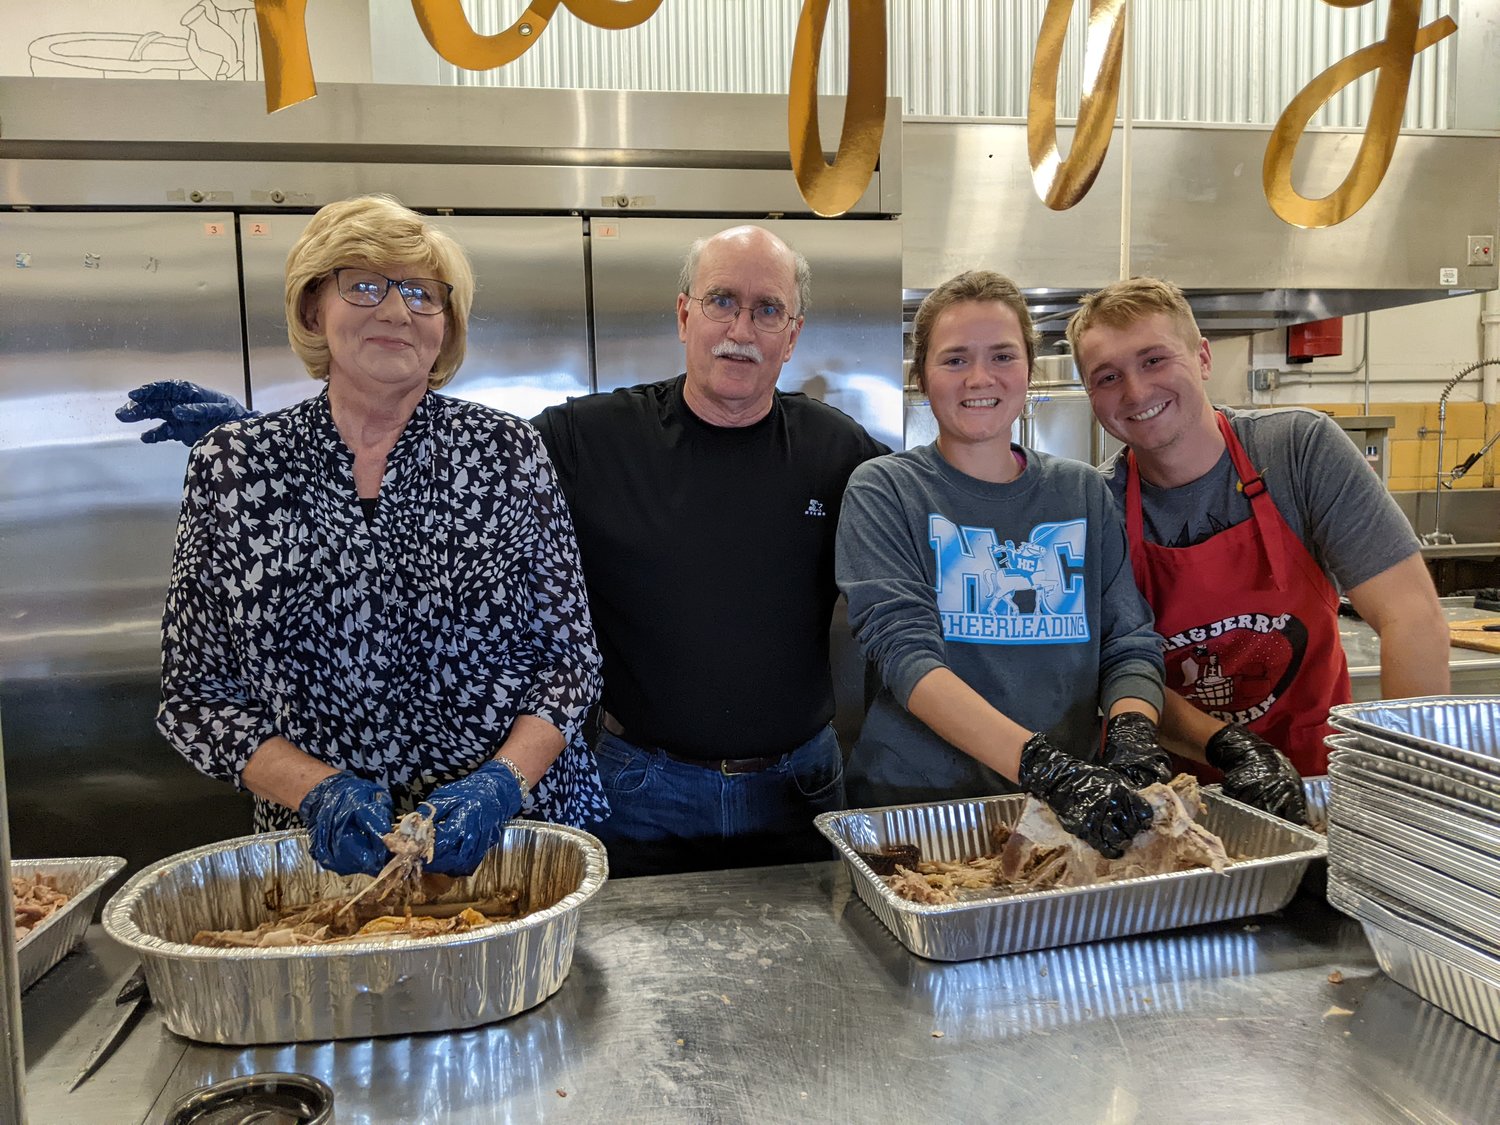 From left, Elaine Meller, Mike Skain, Anna Kolb and Sam Giftos debone cooked turkeys Sunday, Nov. 20, 2022, at Immaculate Conception Catholic Church in Jefferson City. After removing the bones, the volunteers stored the turkey meat in pans with gravy to prevent drying before Thursday's Thanksgiving meal offered free to the public.